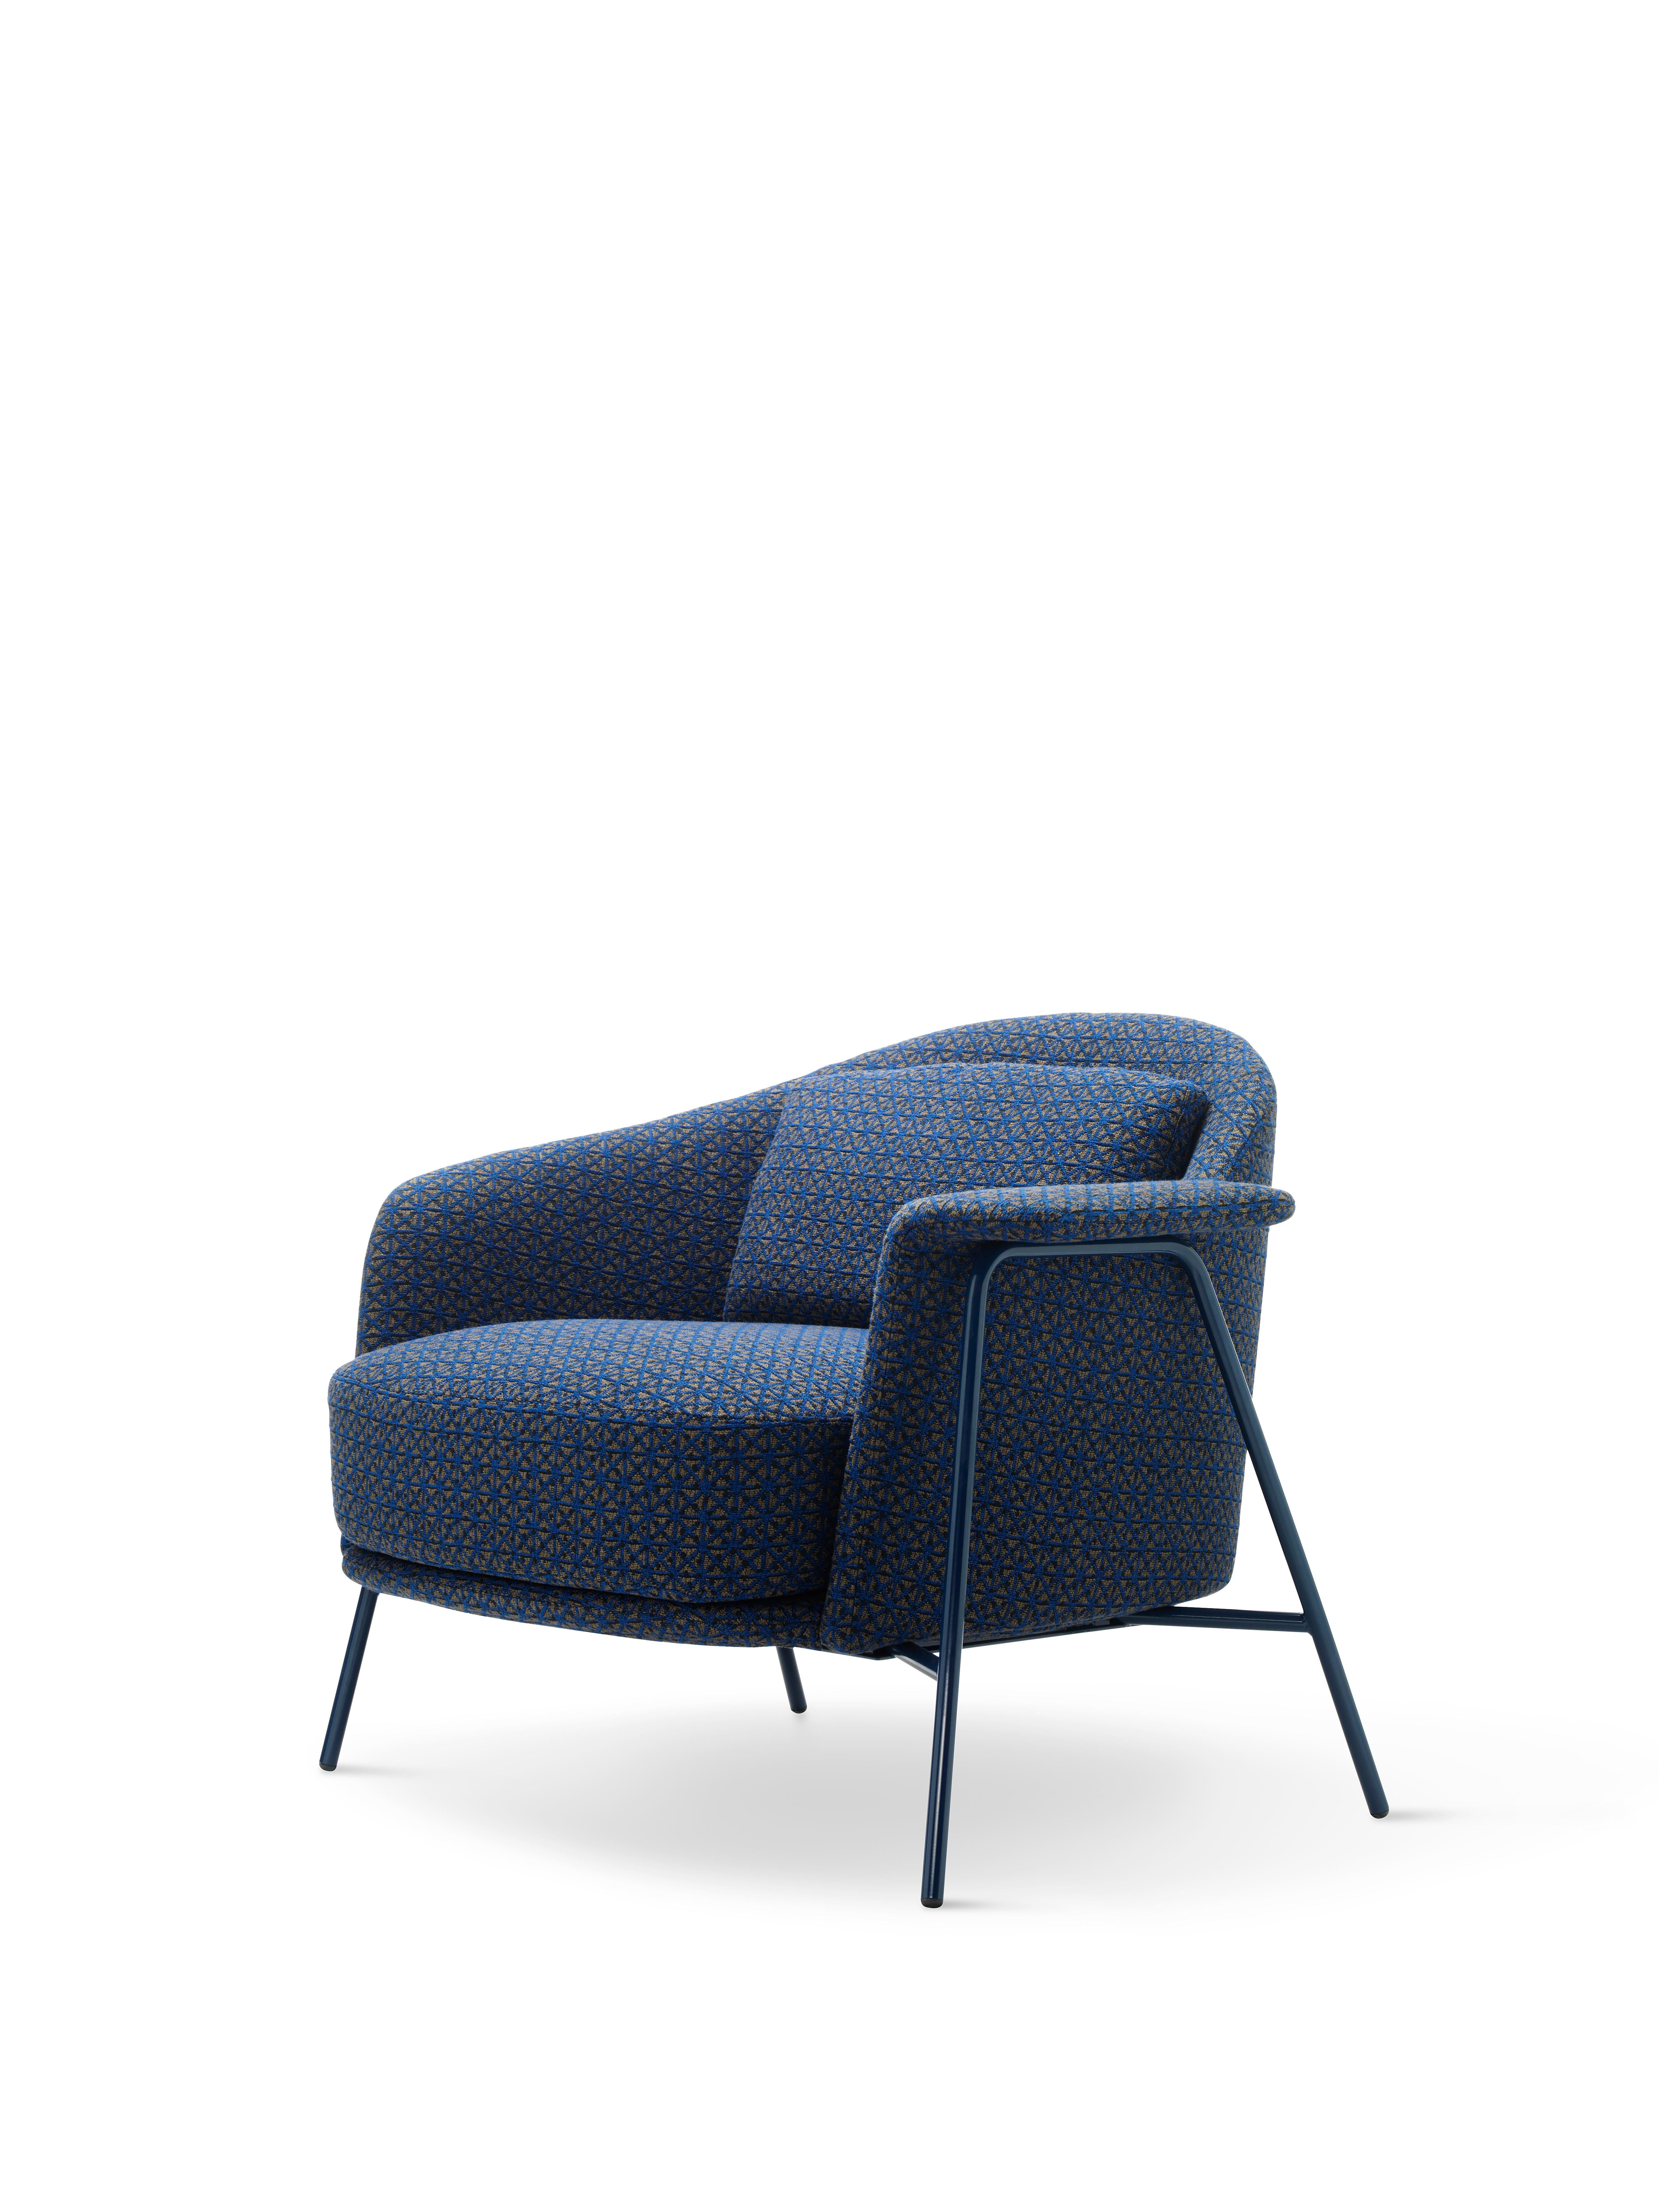 The Kepi armchair’s sober design and vaguely Nordic look are softened by rounded lines that add character and improve comfort. Its clean design and nonchalant elegance make it perfect for the home and a contract environments. The structure in